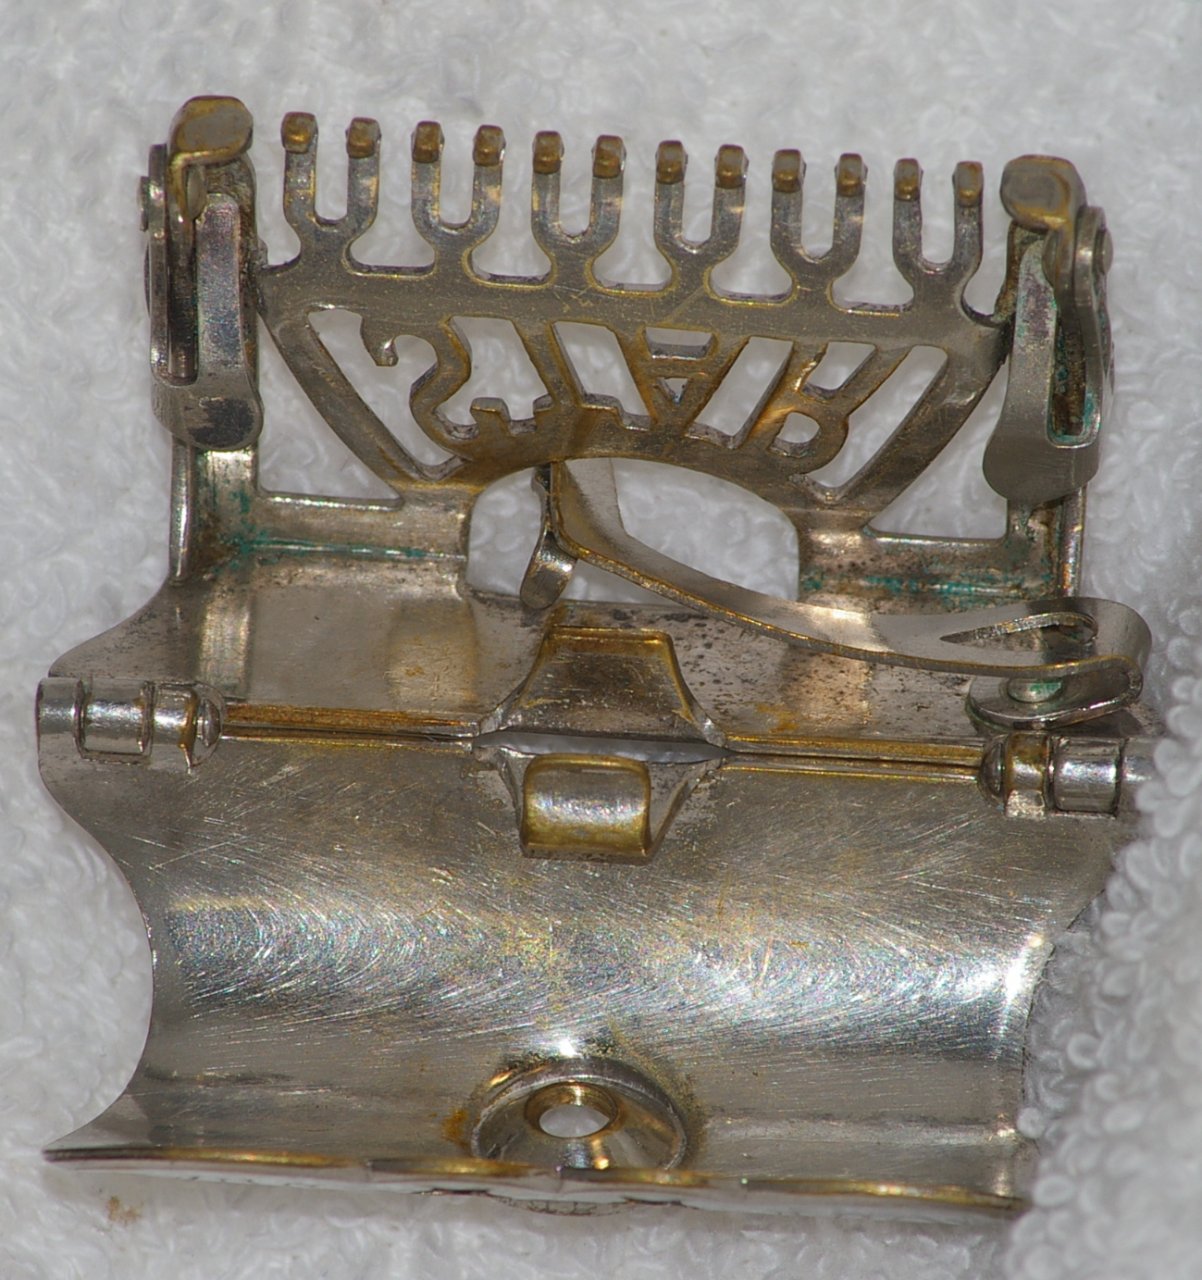 Star Safety Razor Set by Kampfe Brothers, about 1902